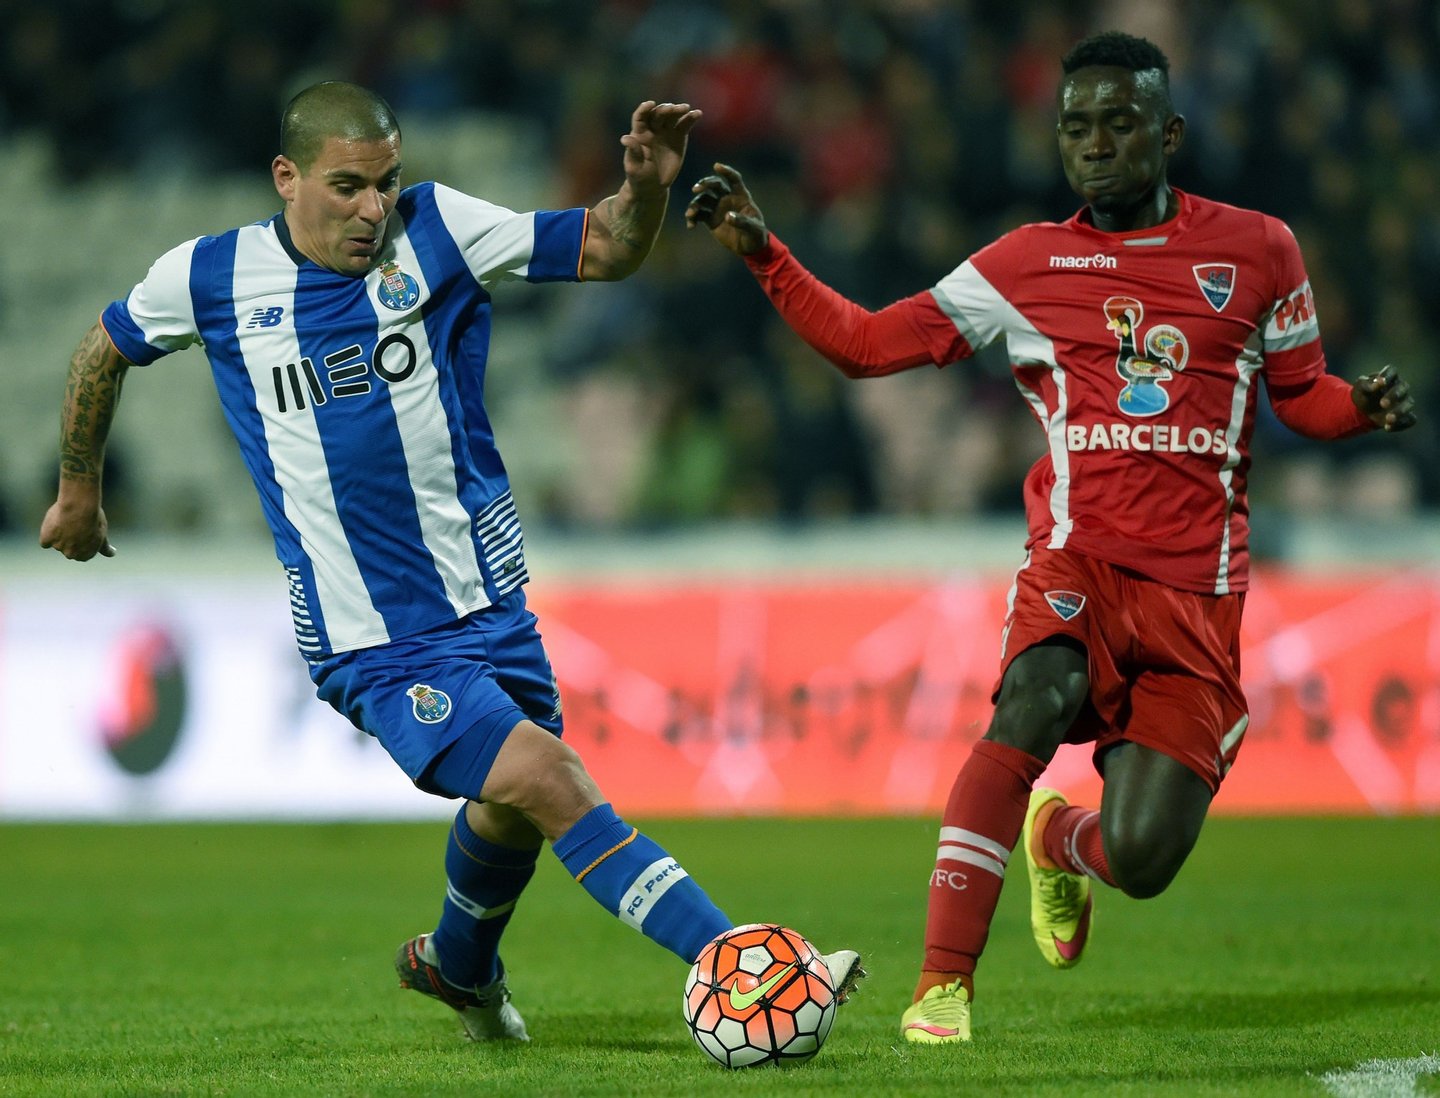 Porto's Uruguayan defender Maxi Pereira (L) vies with Gil Vicente's Ivorian midfielder Kodjio Alphonse during the Portuguese Cup semi-final football match Gil Vicente FC vs FC Porto at the Barcelos City stadium in Barcelos on February 3, 2016. AFP PHOTO/ FRANCISCO LEONG / AFP / FRANCISCO LEONG (Photo credit should read FRANCISCO LEONG/AFP/Getty Images)